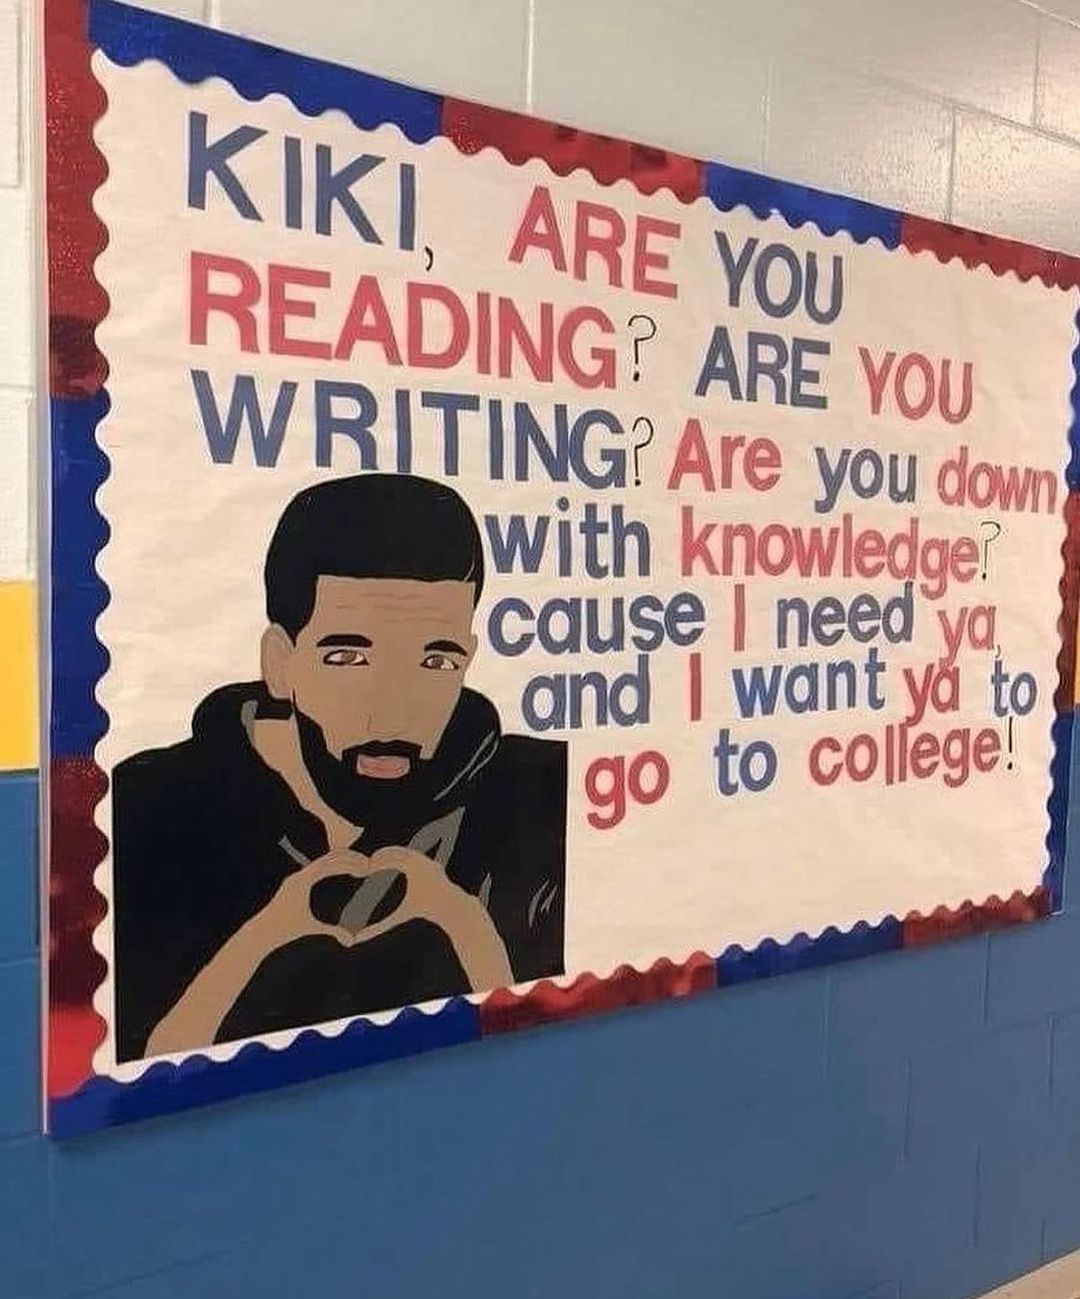 available - Kiki, Are You Reading? Are You Writing? Are you down with knowledge? cause I need ya , and I want ya to go to college